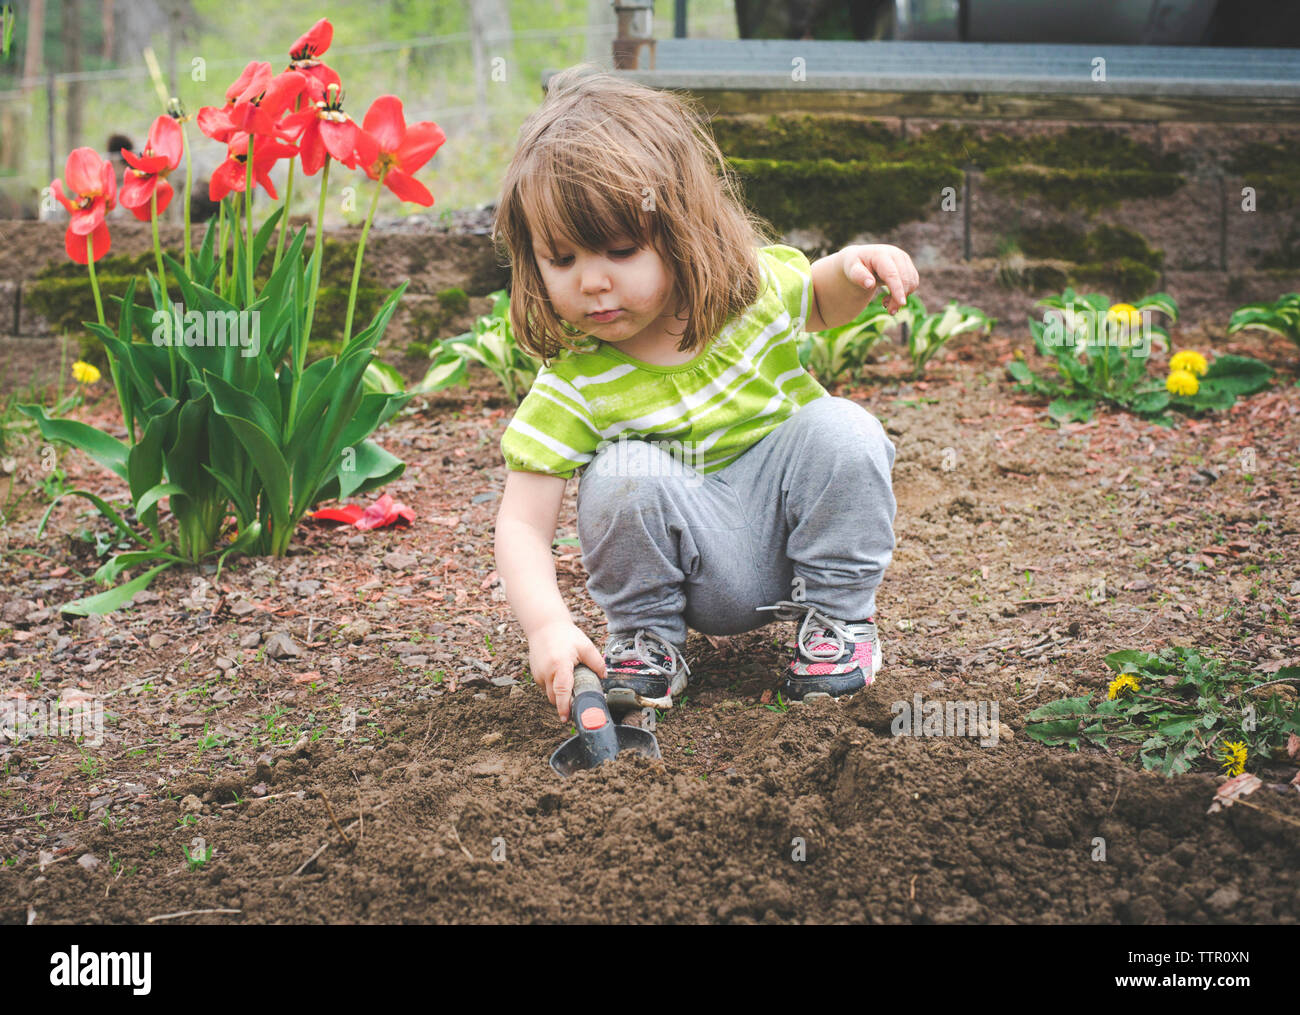 Cute girl digging soil with trowel while crouching in garden Stock Photo